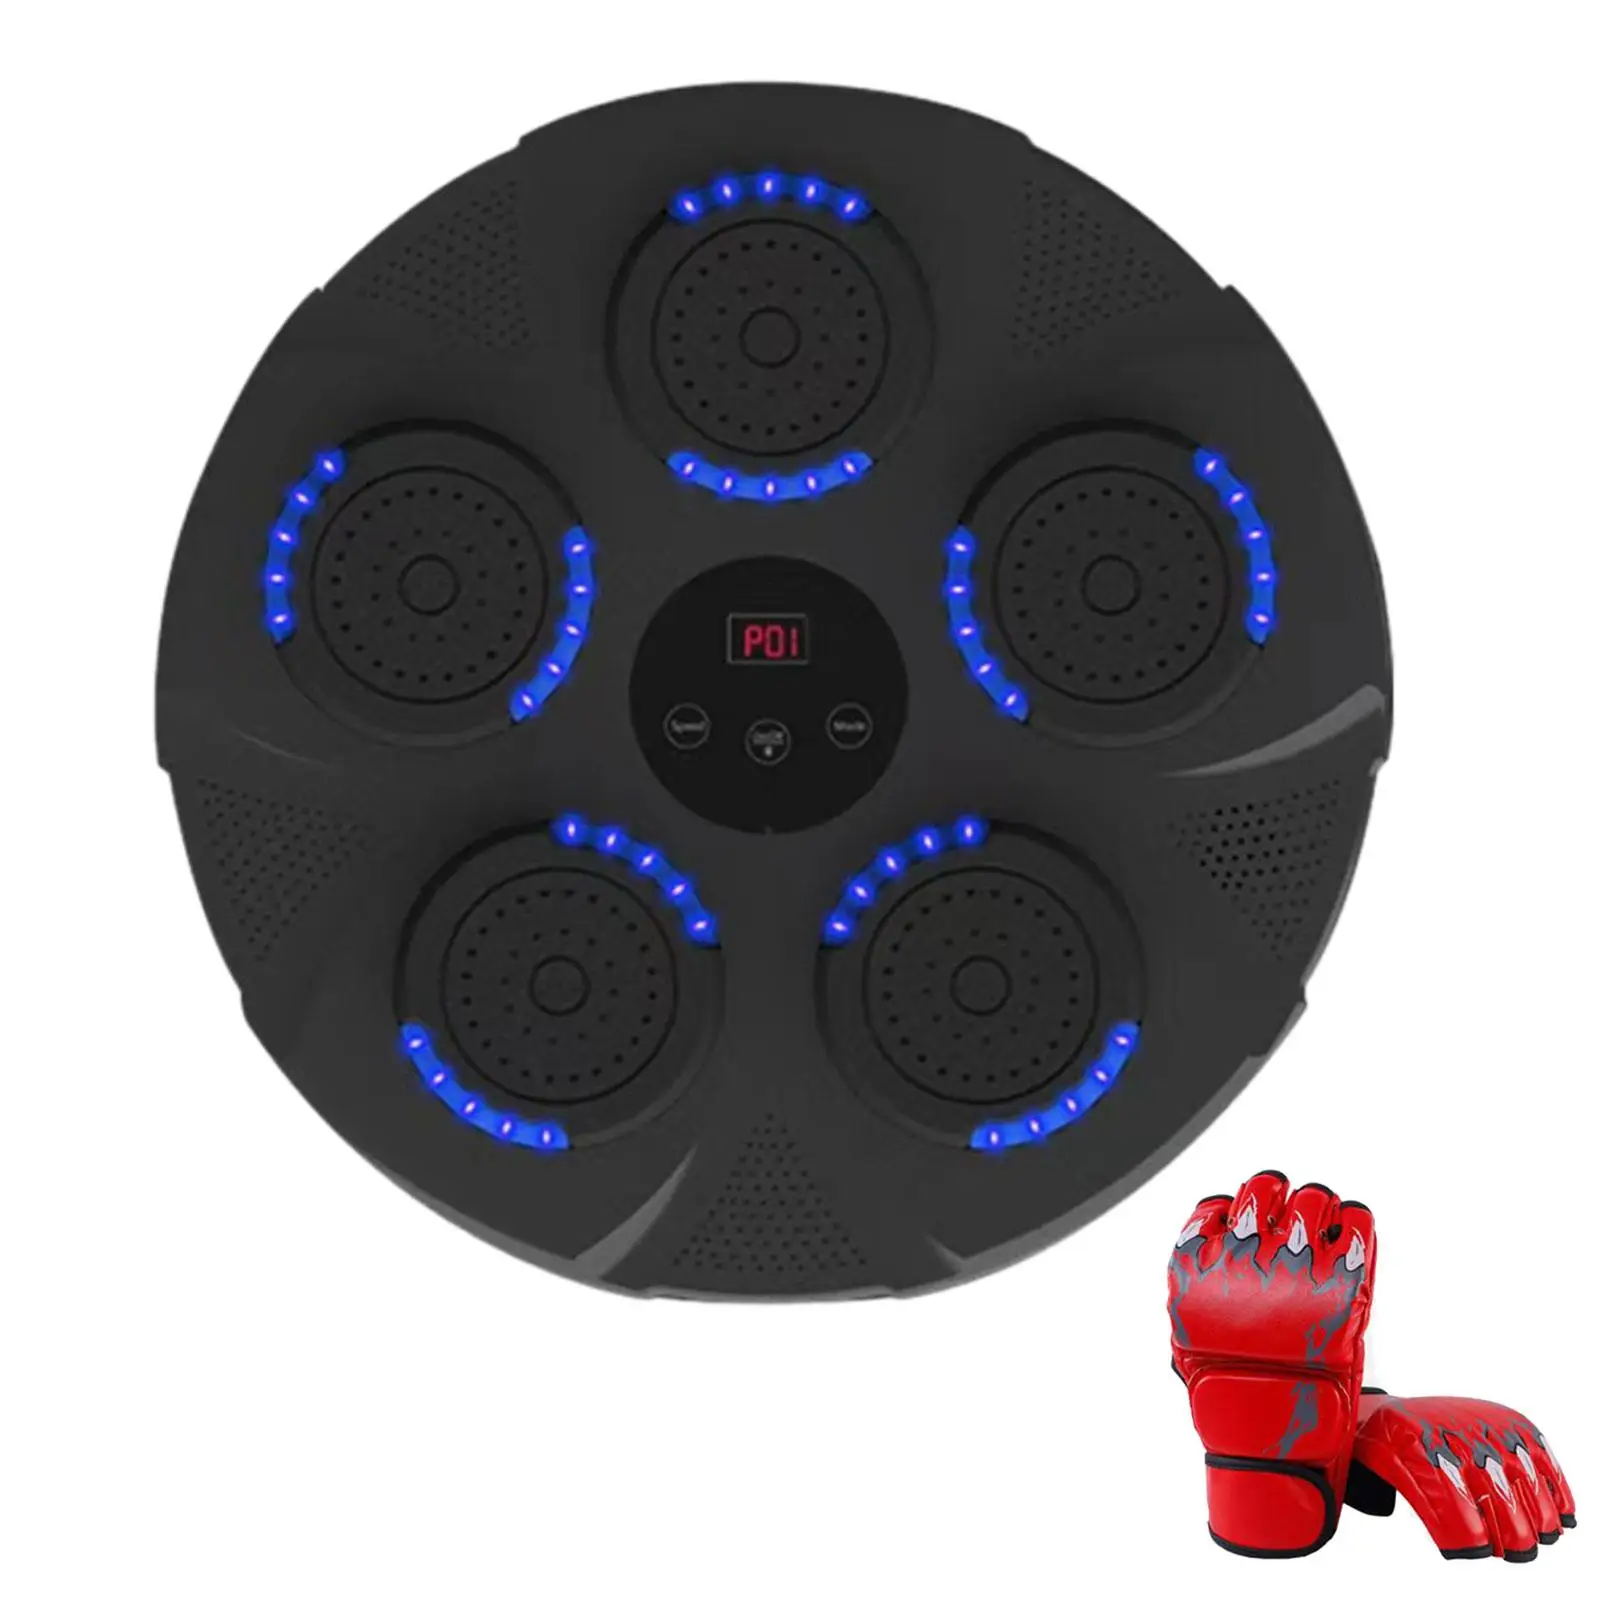 Music Boxing Machine Wall Durable Music Boxing Pads Multi Musical Target Boxing Reaction Wall for Workout Relaxing